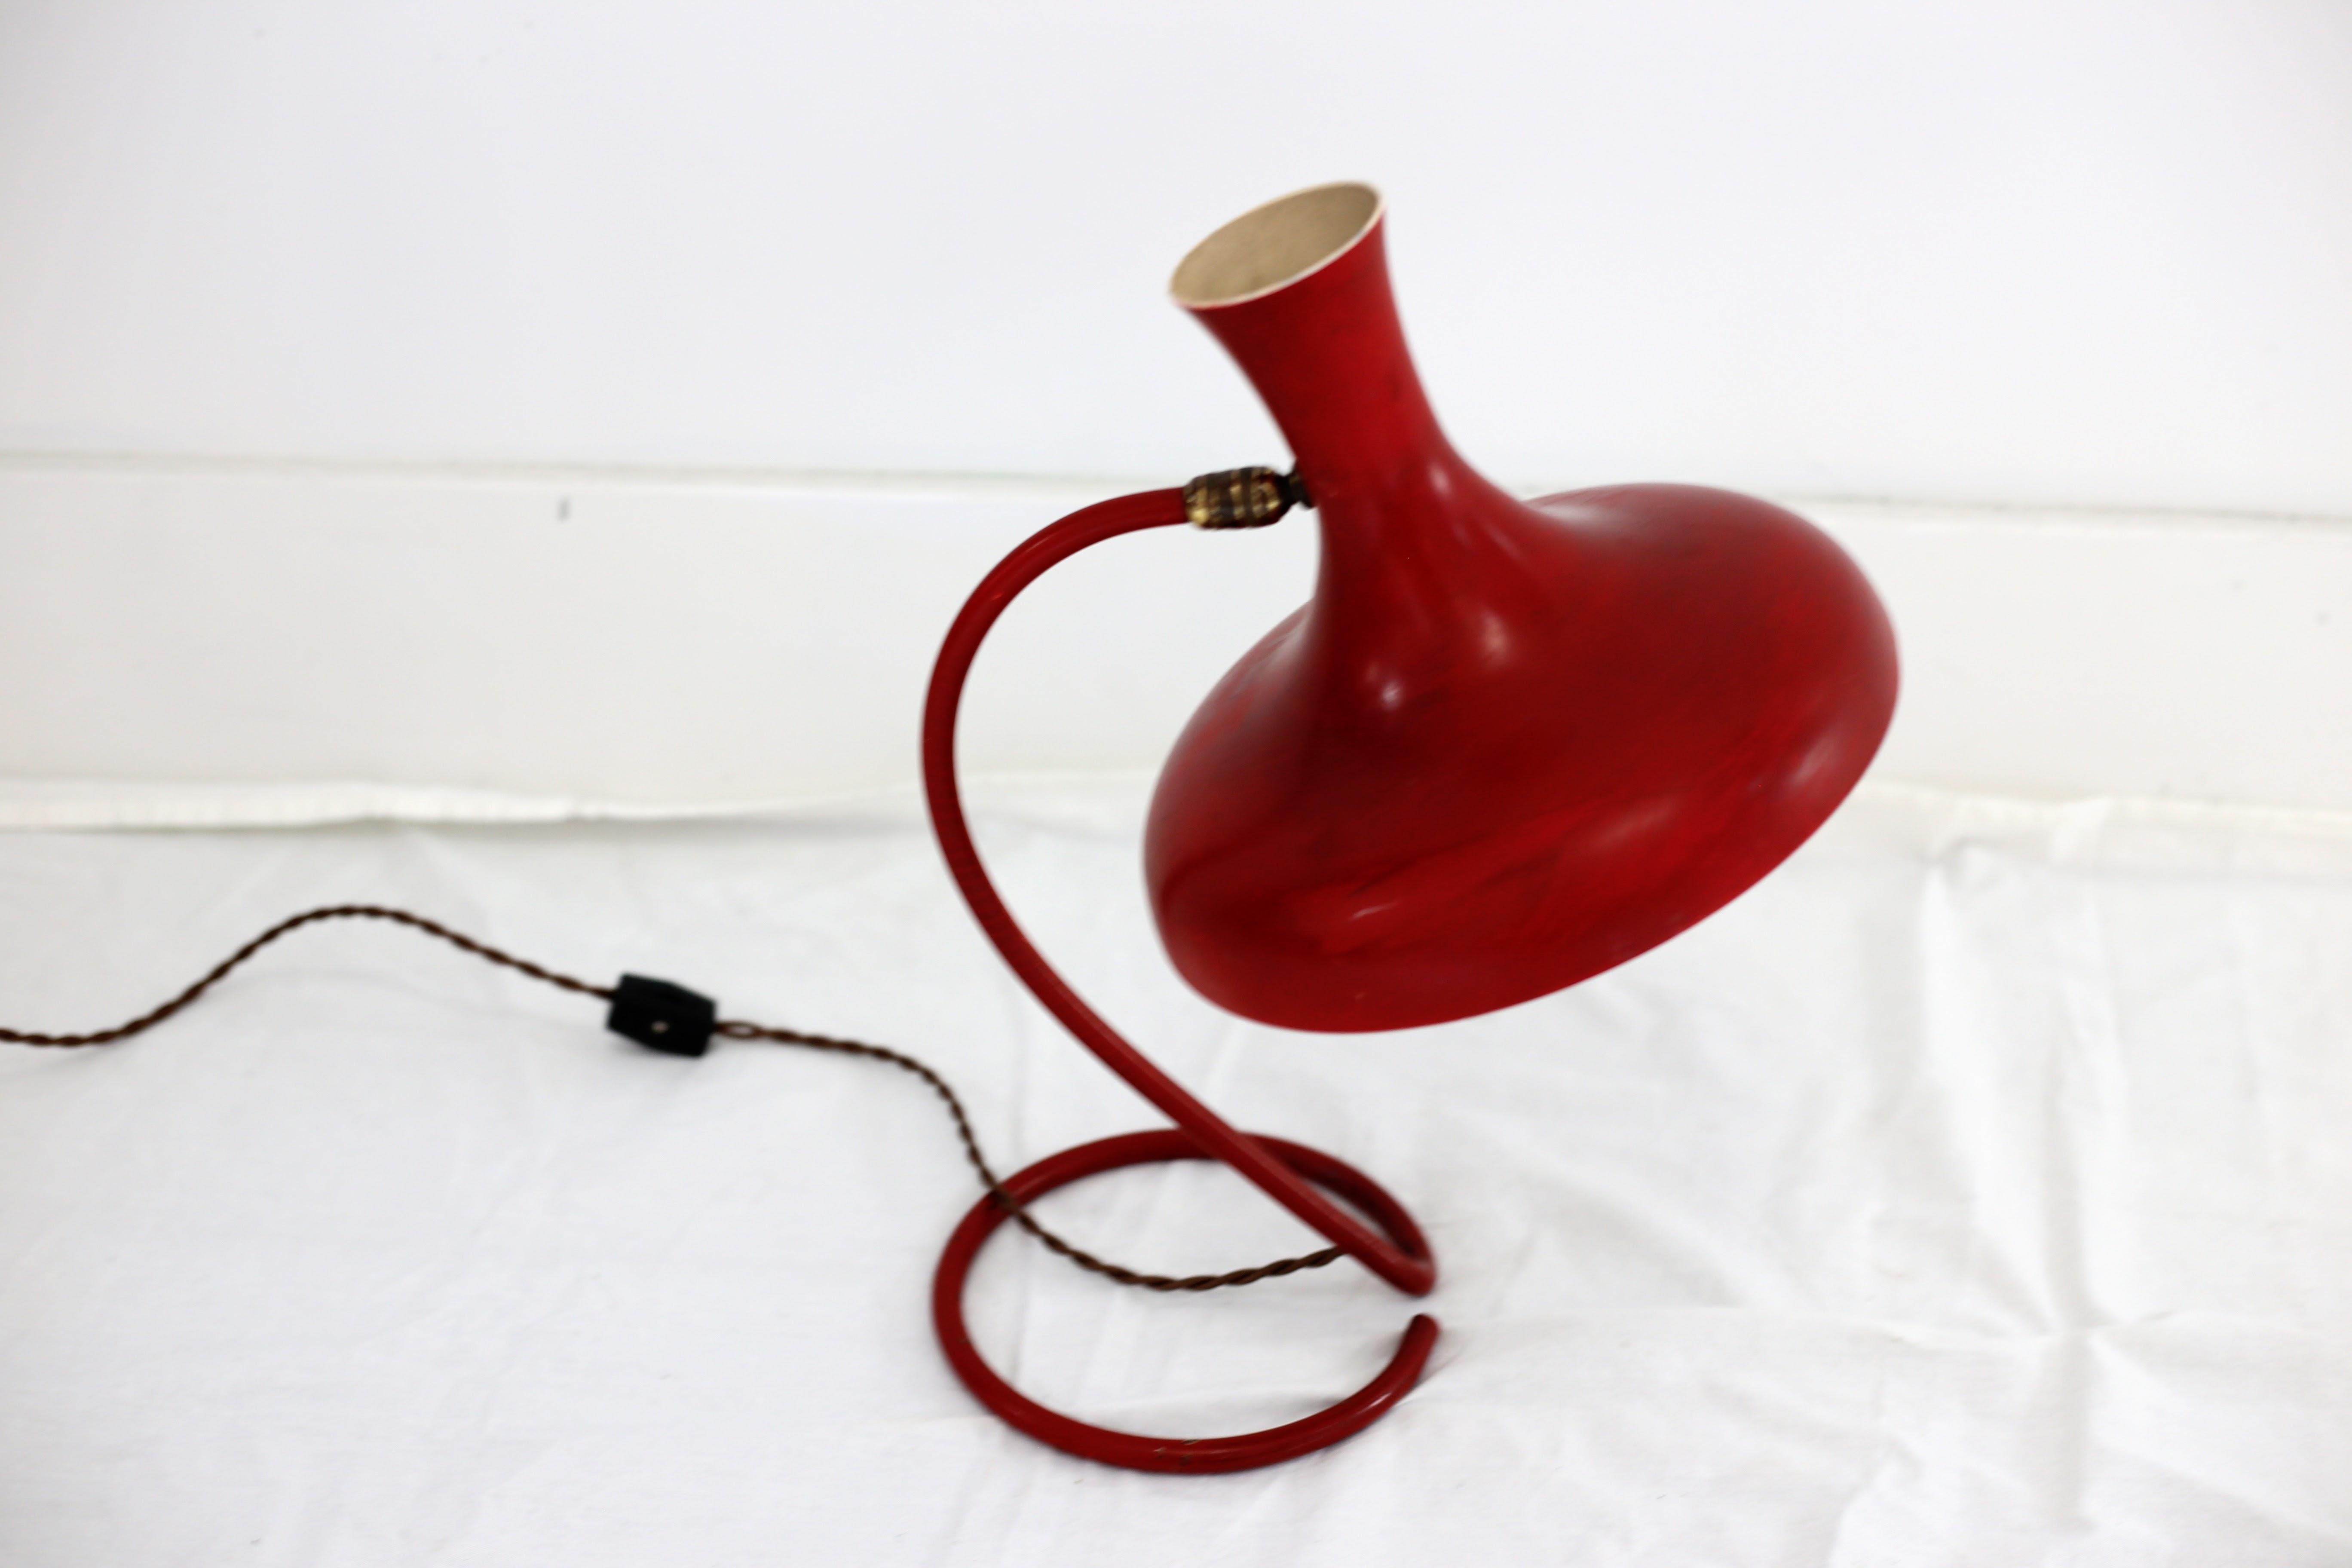 vintage red lamps